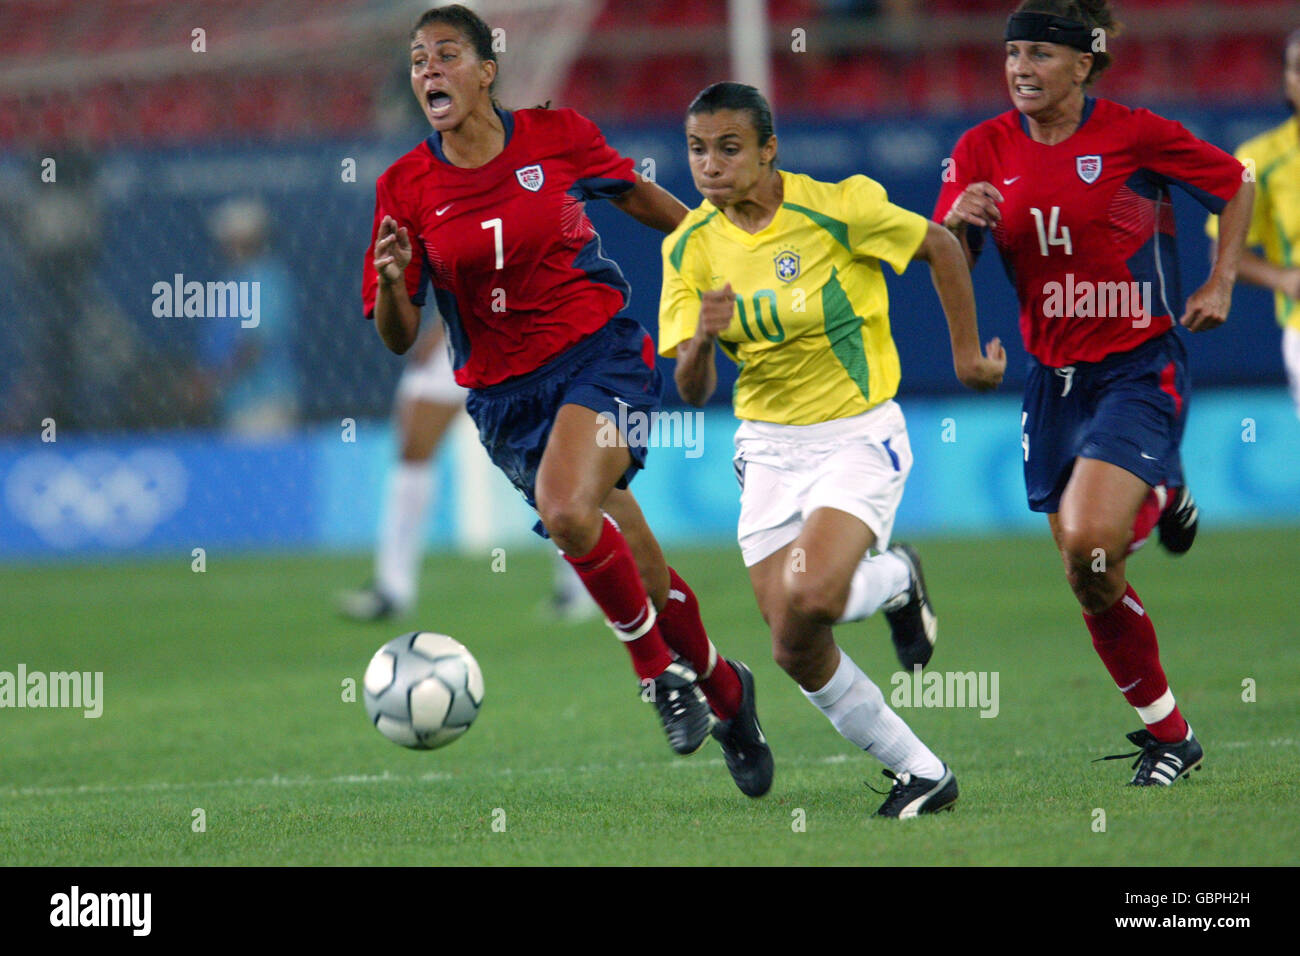 Soccer - Athens Olympic Games 2004 - Women's Final - USA v Brazil. Brazil's Marta is put under pressure by USA's Shannon Boxx (l) and Joy Fawcett (r) Stock Photo